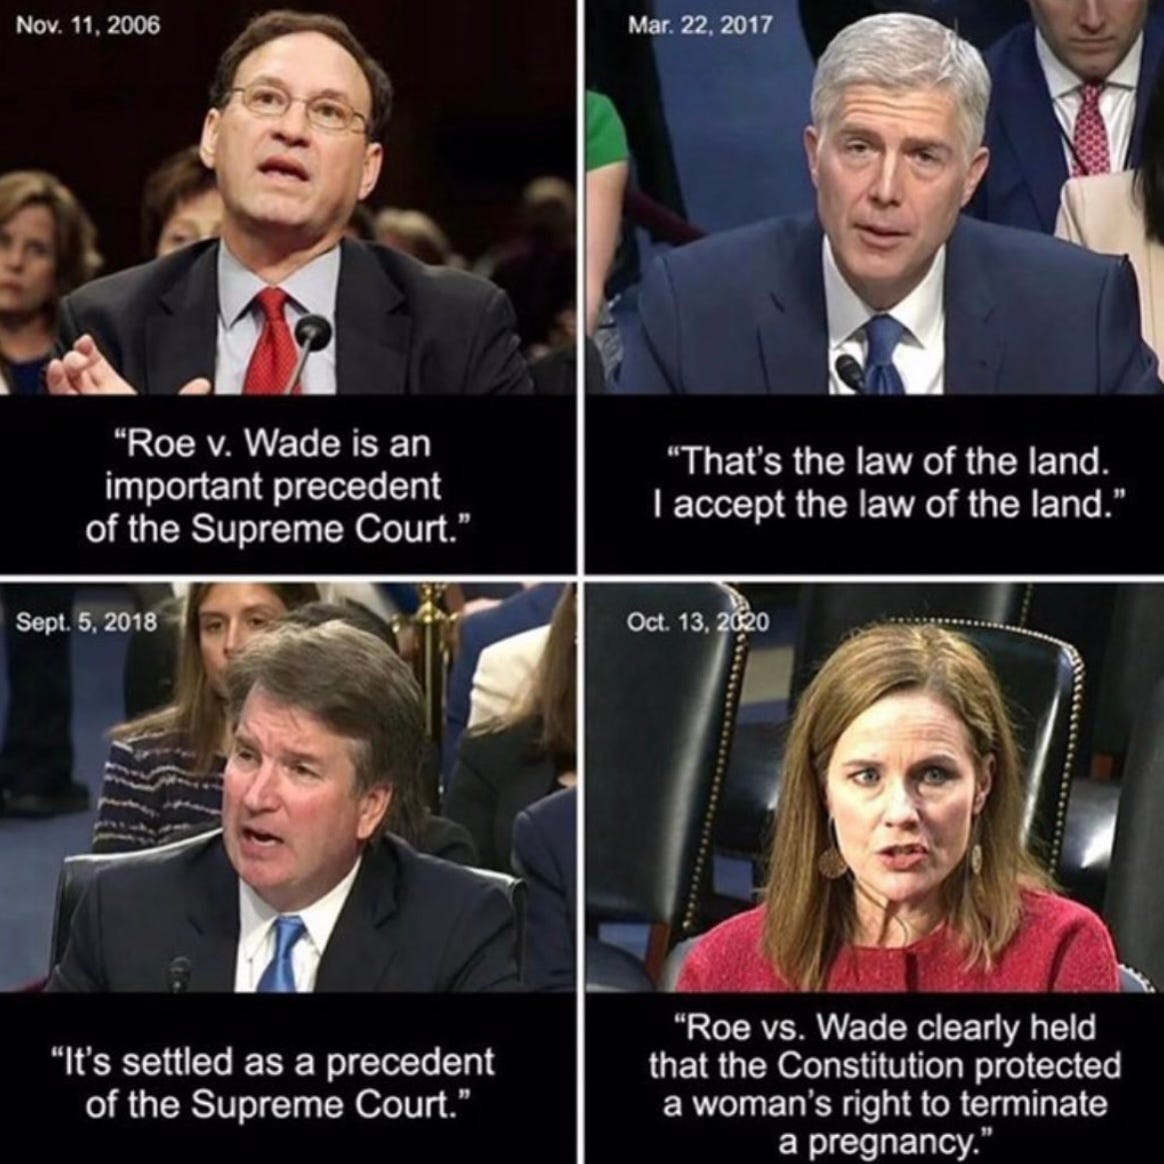 Justices Samuel Alito, Neil Gorsuch, Brett Kavanaugh, and Amy Coney Barrett during their respective confirmation hearings give their positions on Roe vs. Wade.